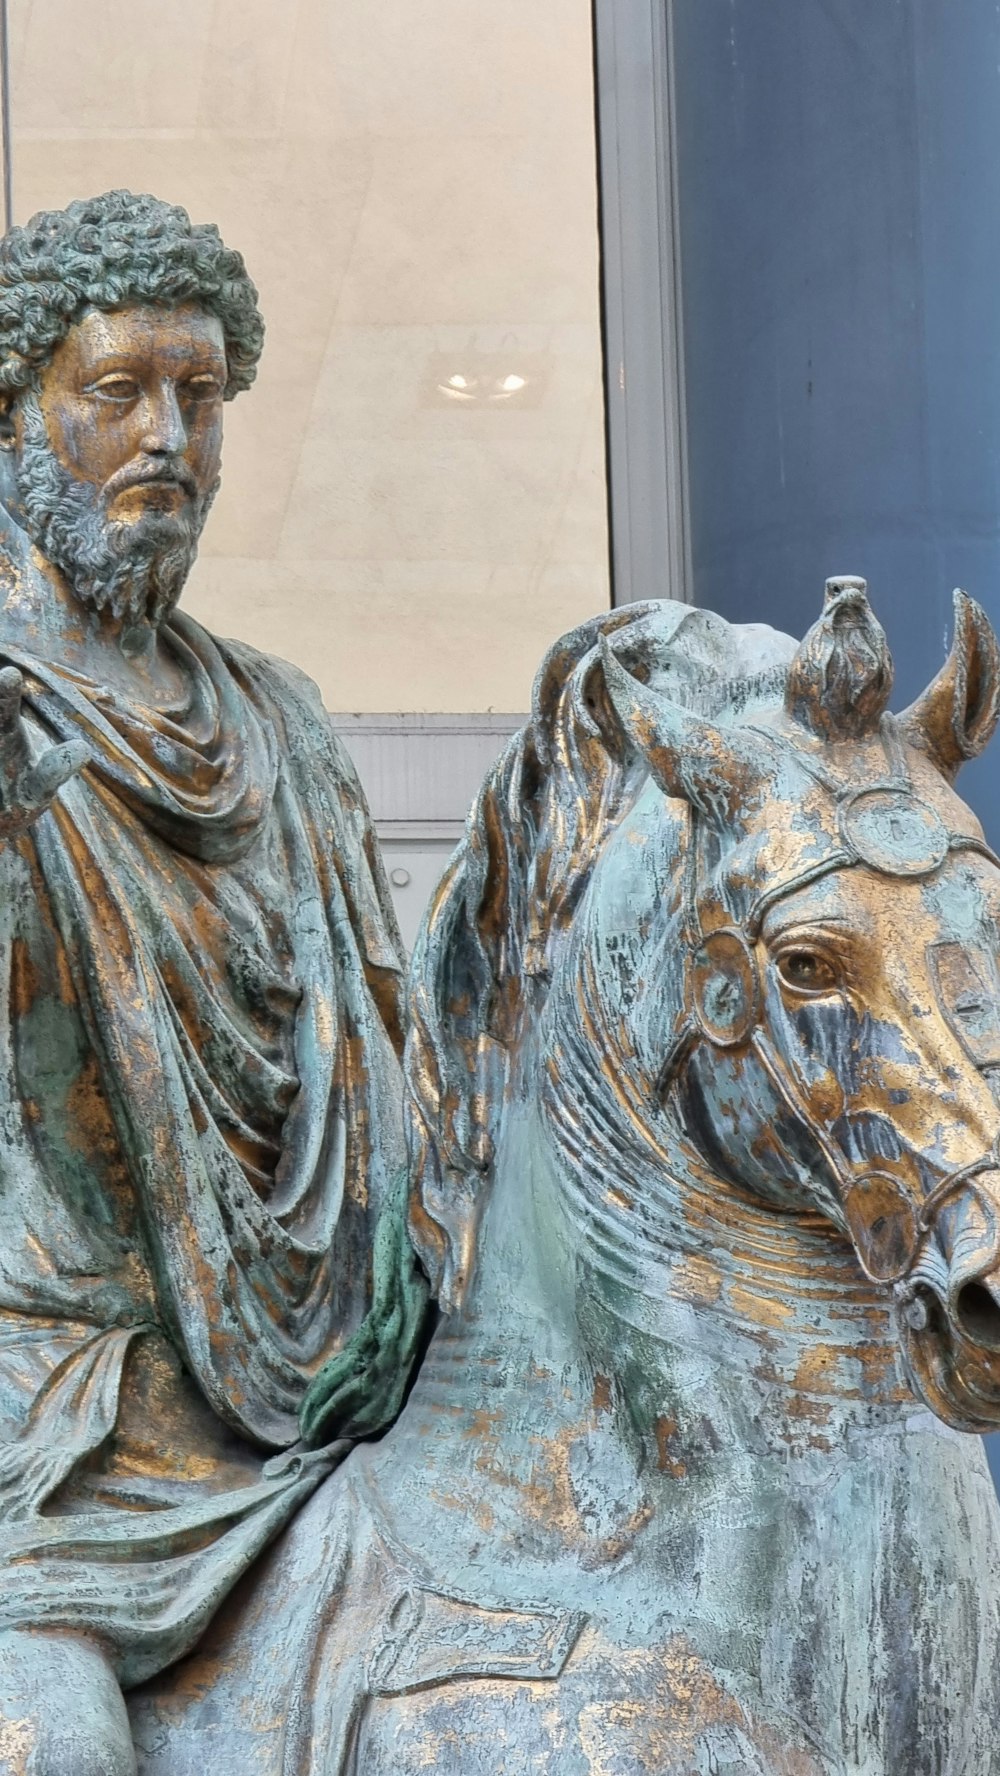 a statue of a man sitting on a horse